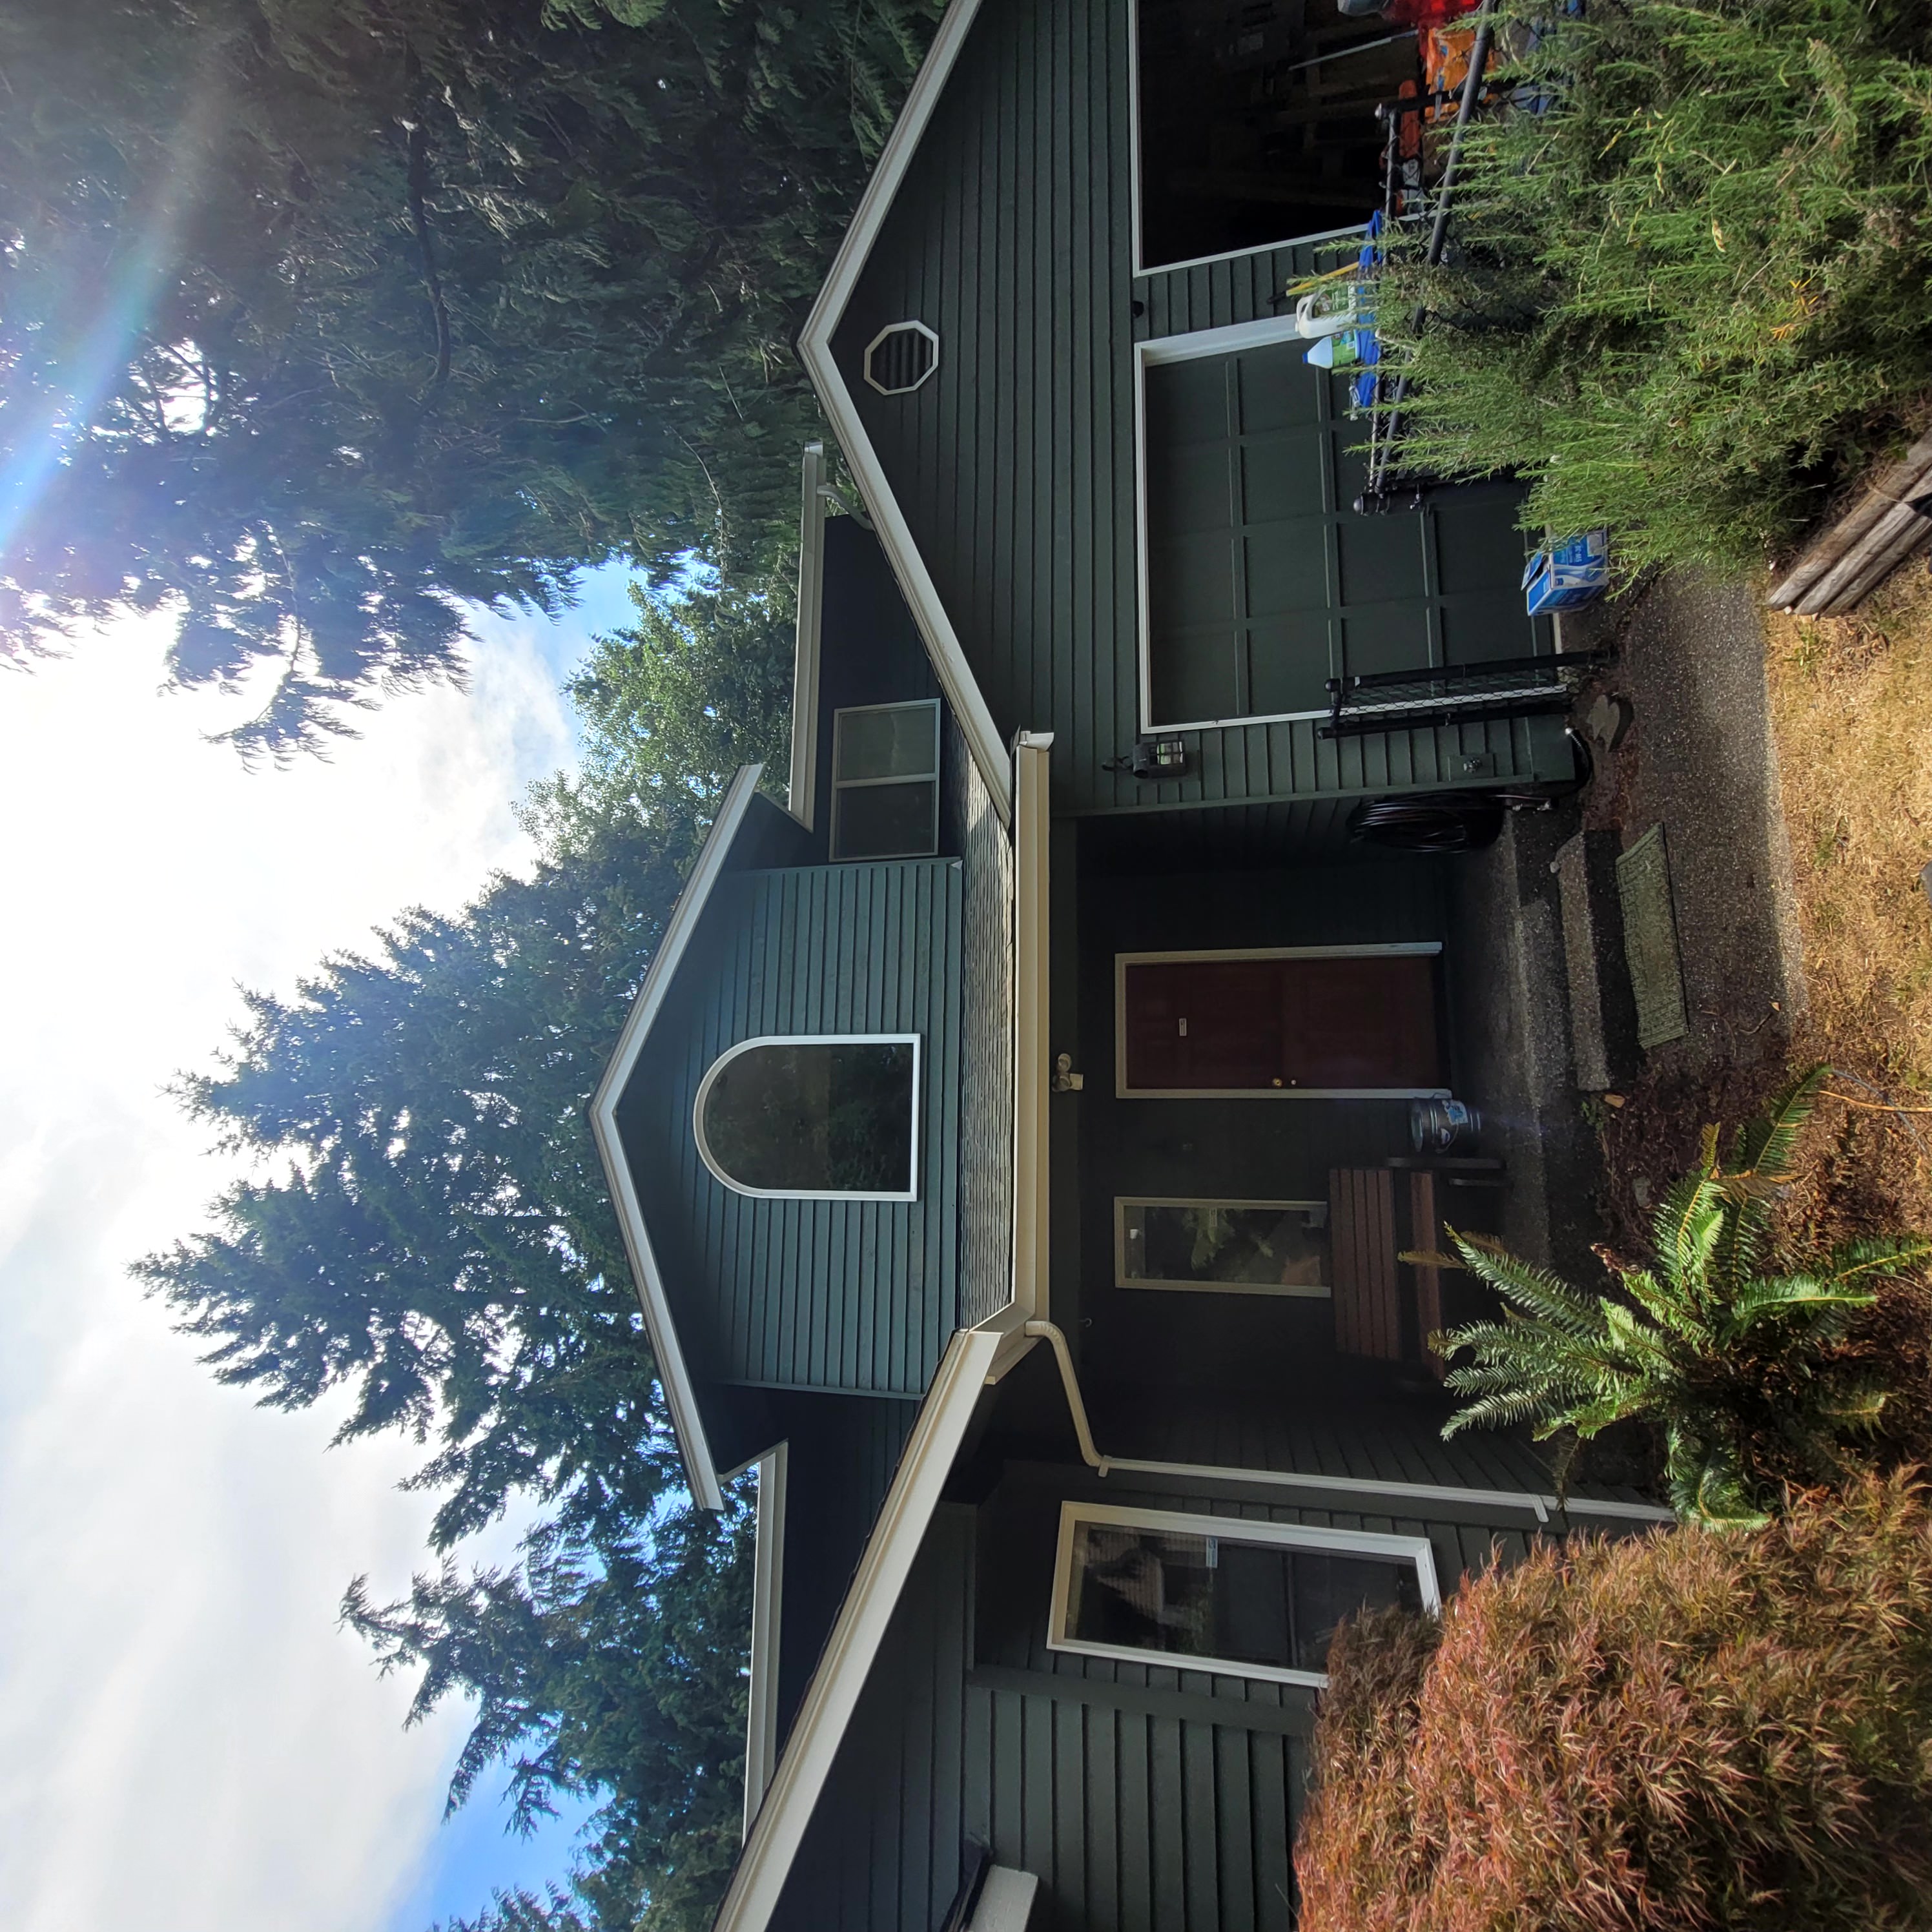 Roof and Gutter Cleaning, House Wash and Window Cleaning in Poulsbo WA, Kitsap County